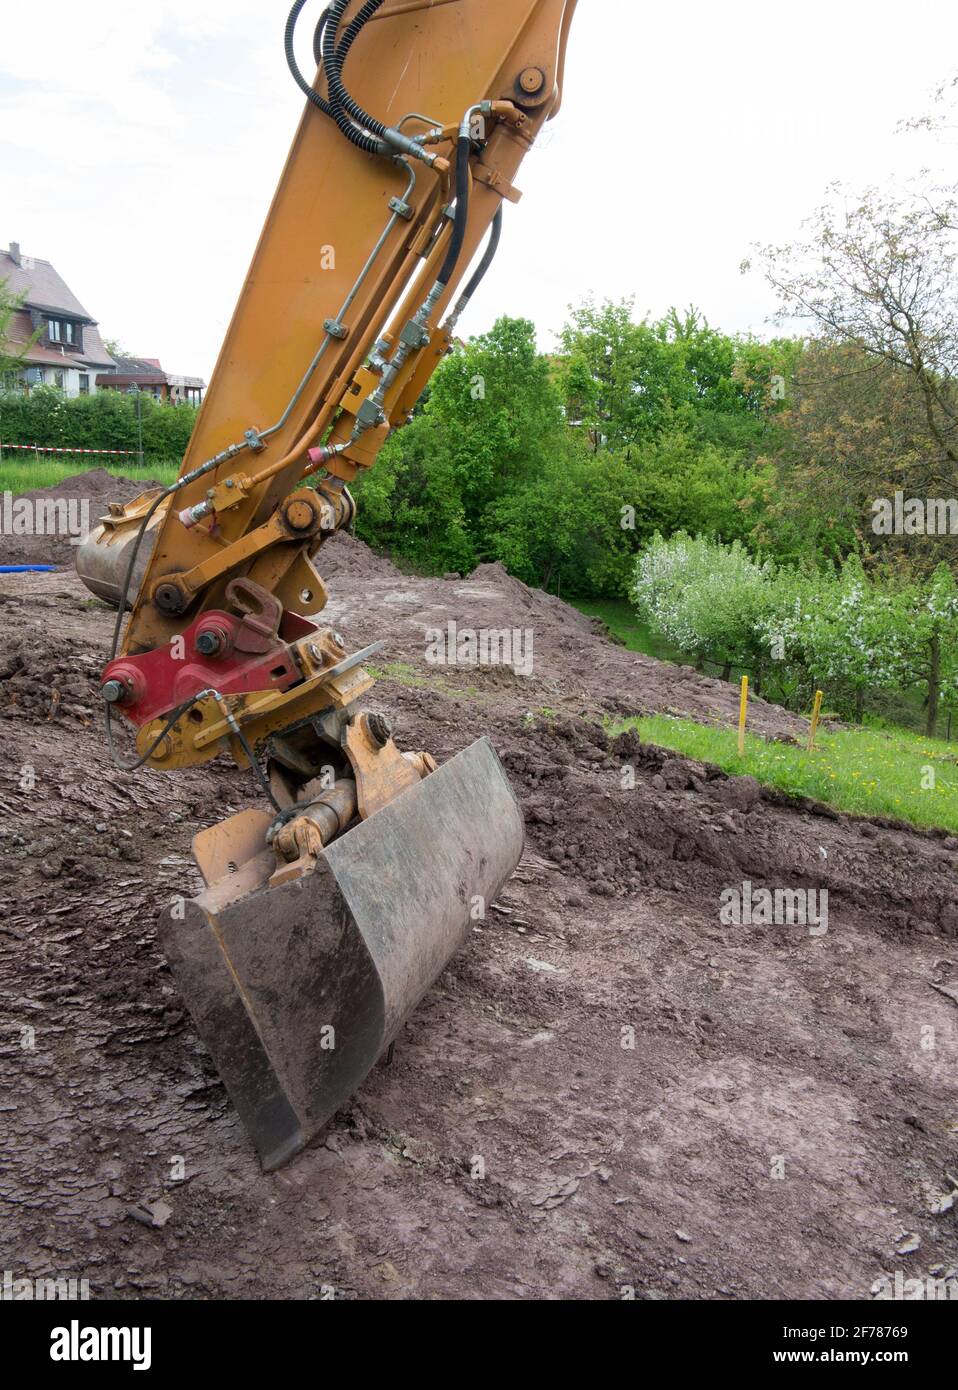 Bucket of a large excavator on a rural construction site Stock Photo